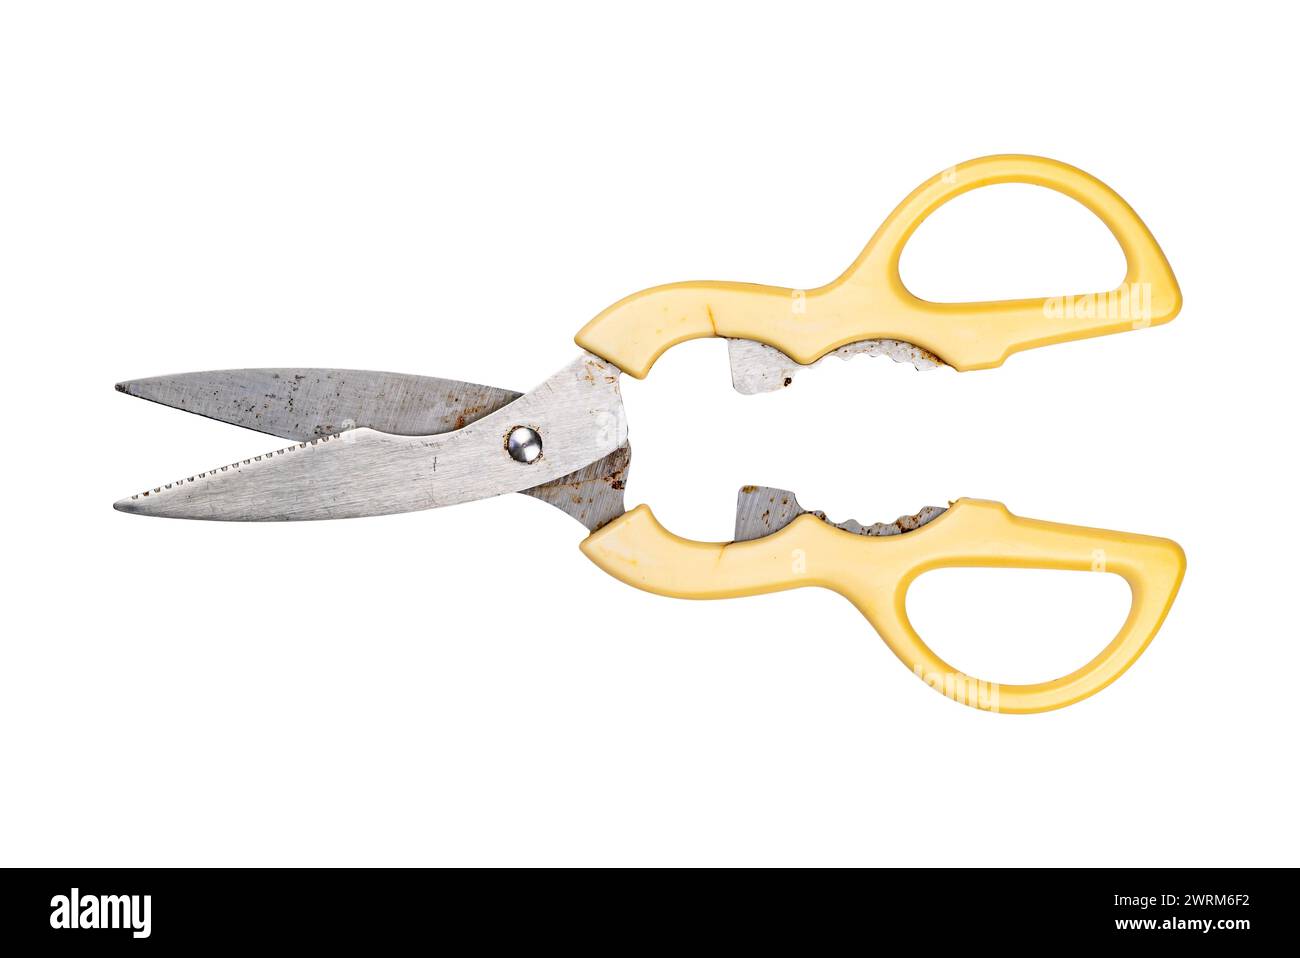 Top view a pair of old heavy duty metal with yellow plastic handle kitchen shears or scissors isolated on white background with clipping path. Stock Photo